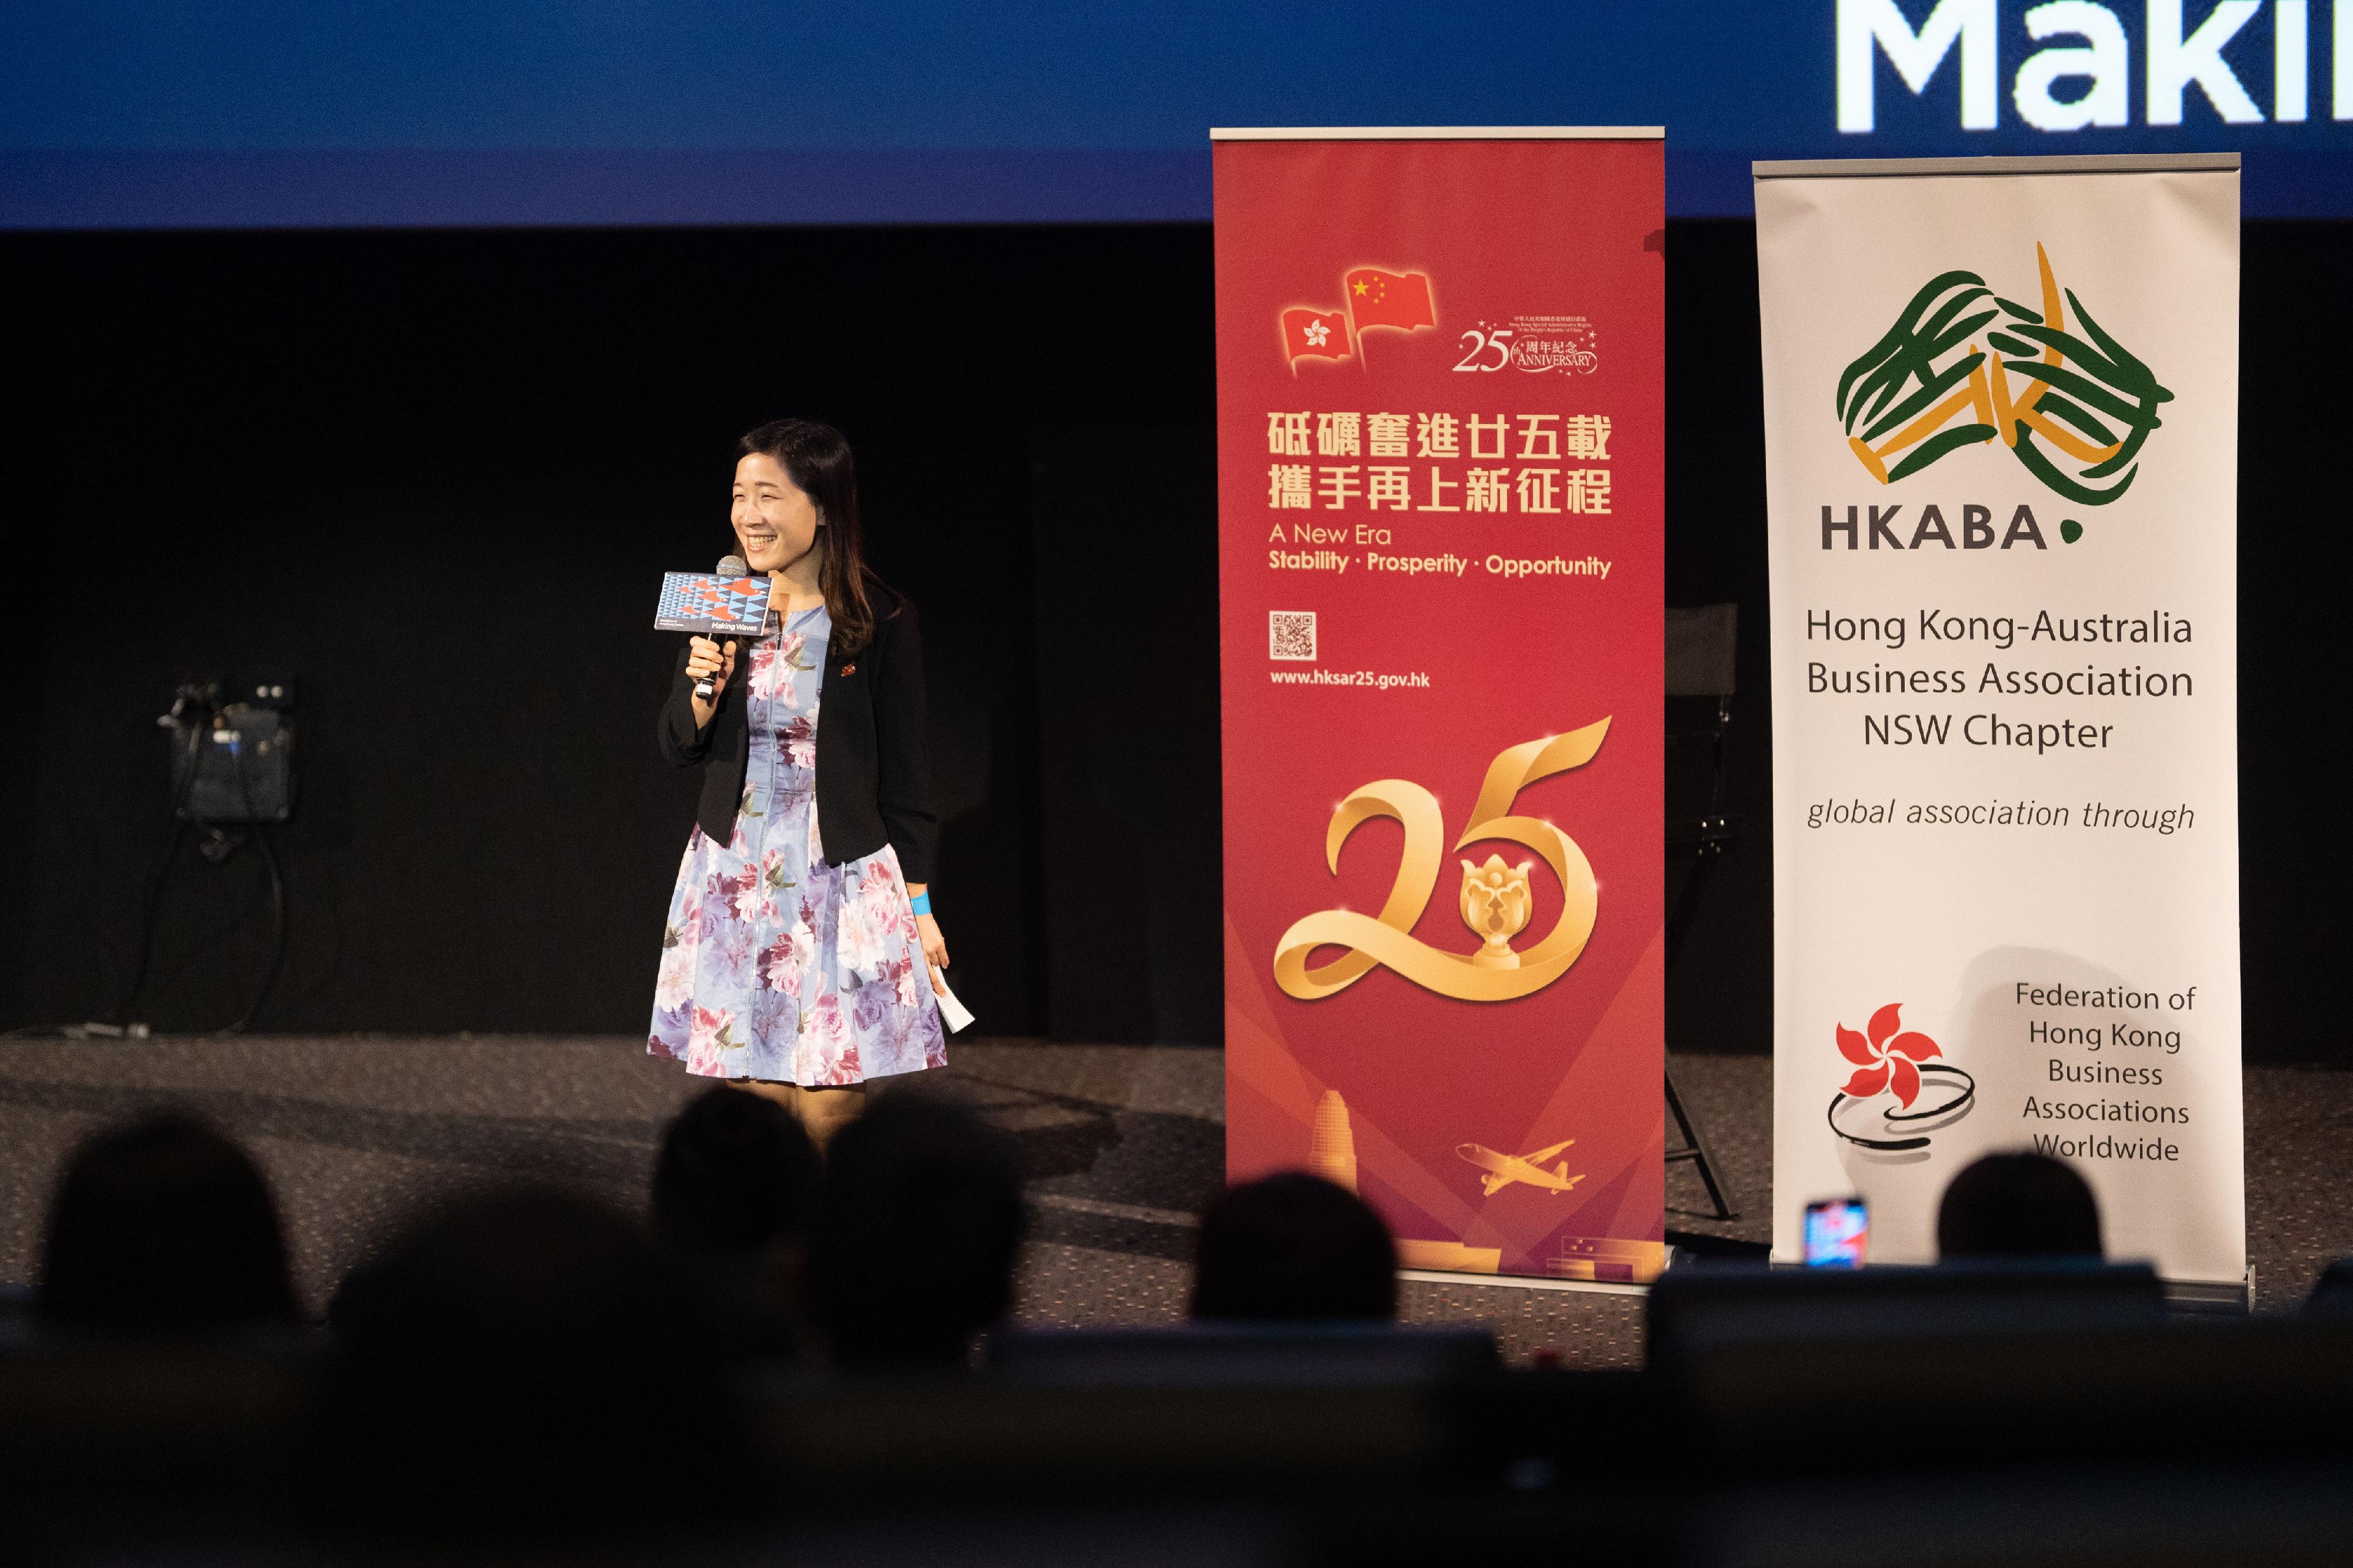 The Hong Kong Economic and Trade Office, Sydney (Sydney ETO) supported the "Making Waves - Navigators of Hong Kong Cinema" to celebrate the 25th anniversary of the establishment of the Hong Kong Special Administrative Region. Photo shows the Director of the Sydney ETO, Miss Trista Lim, delivering a welcoming speech before the screening of Table for Six.